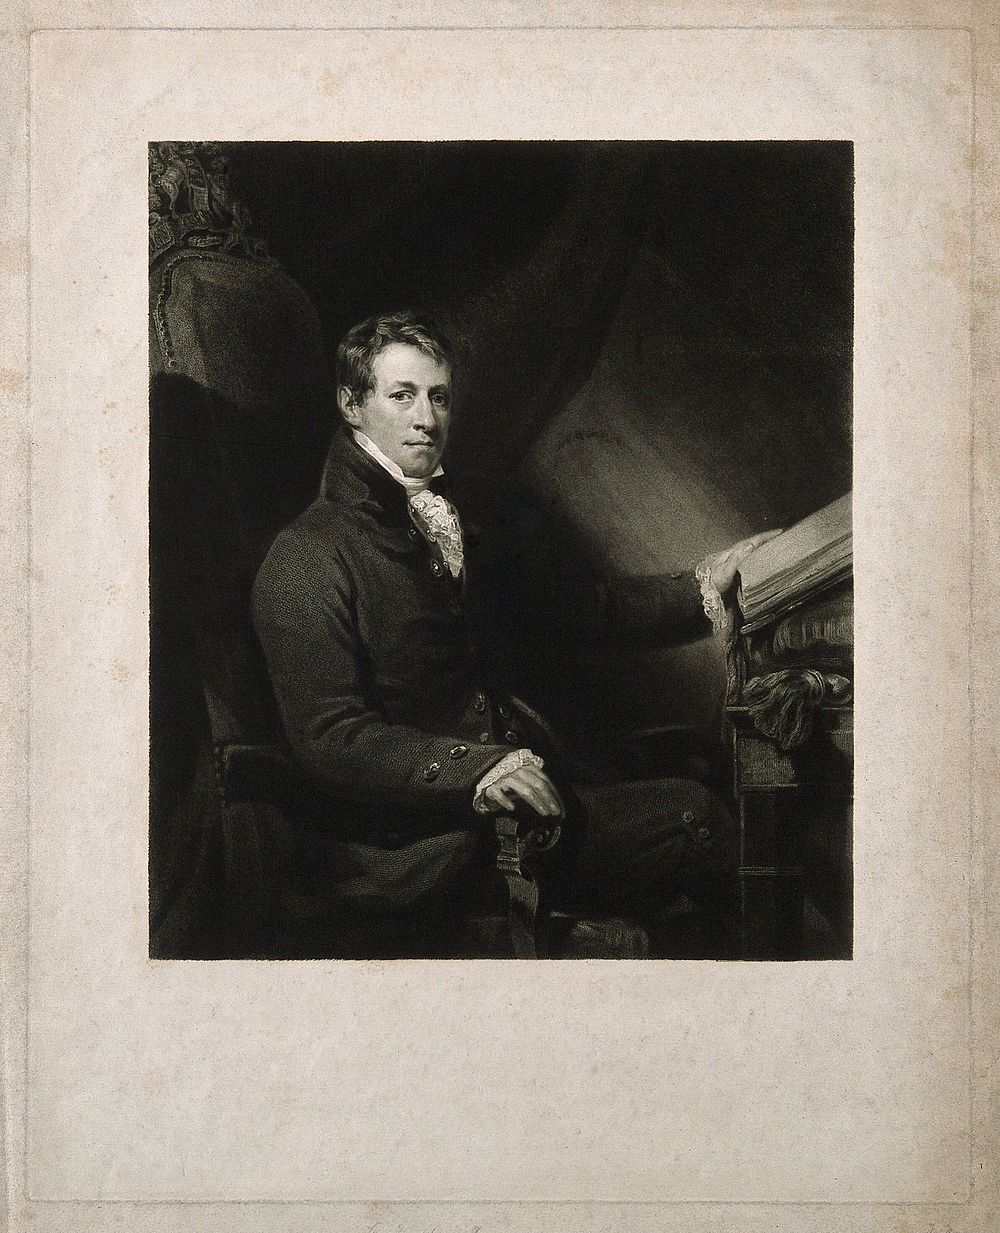 Sir Humphry Davy. Stipple engraving by W. Walker, 1830, after J. Jackson, 1823.